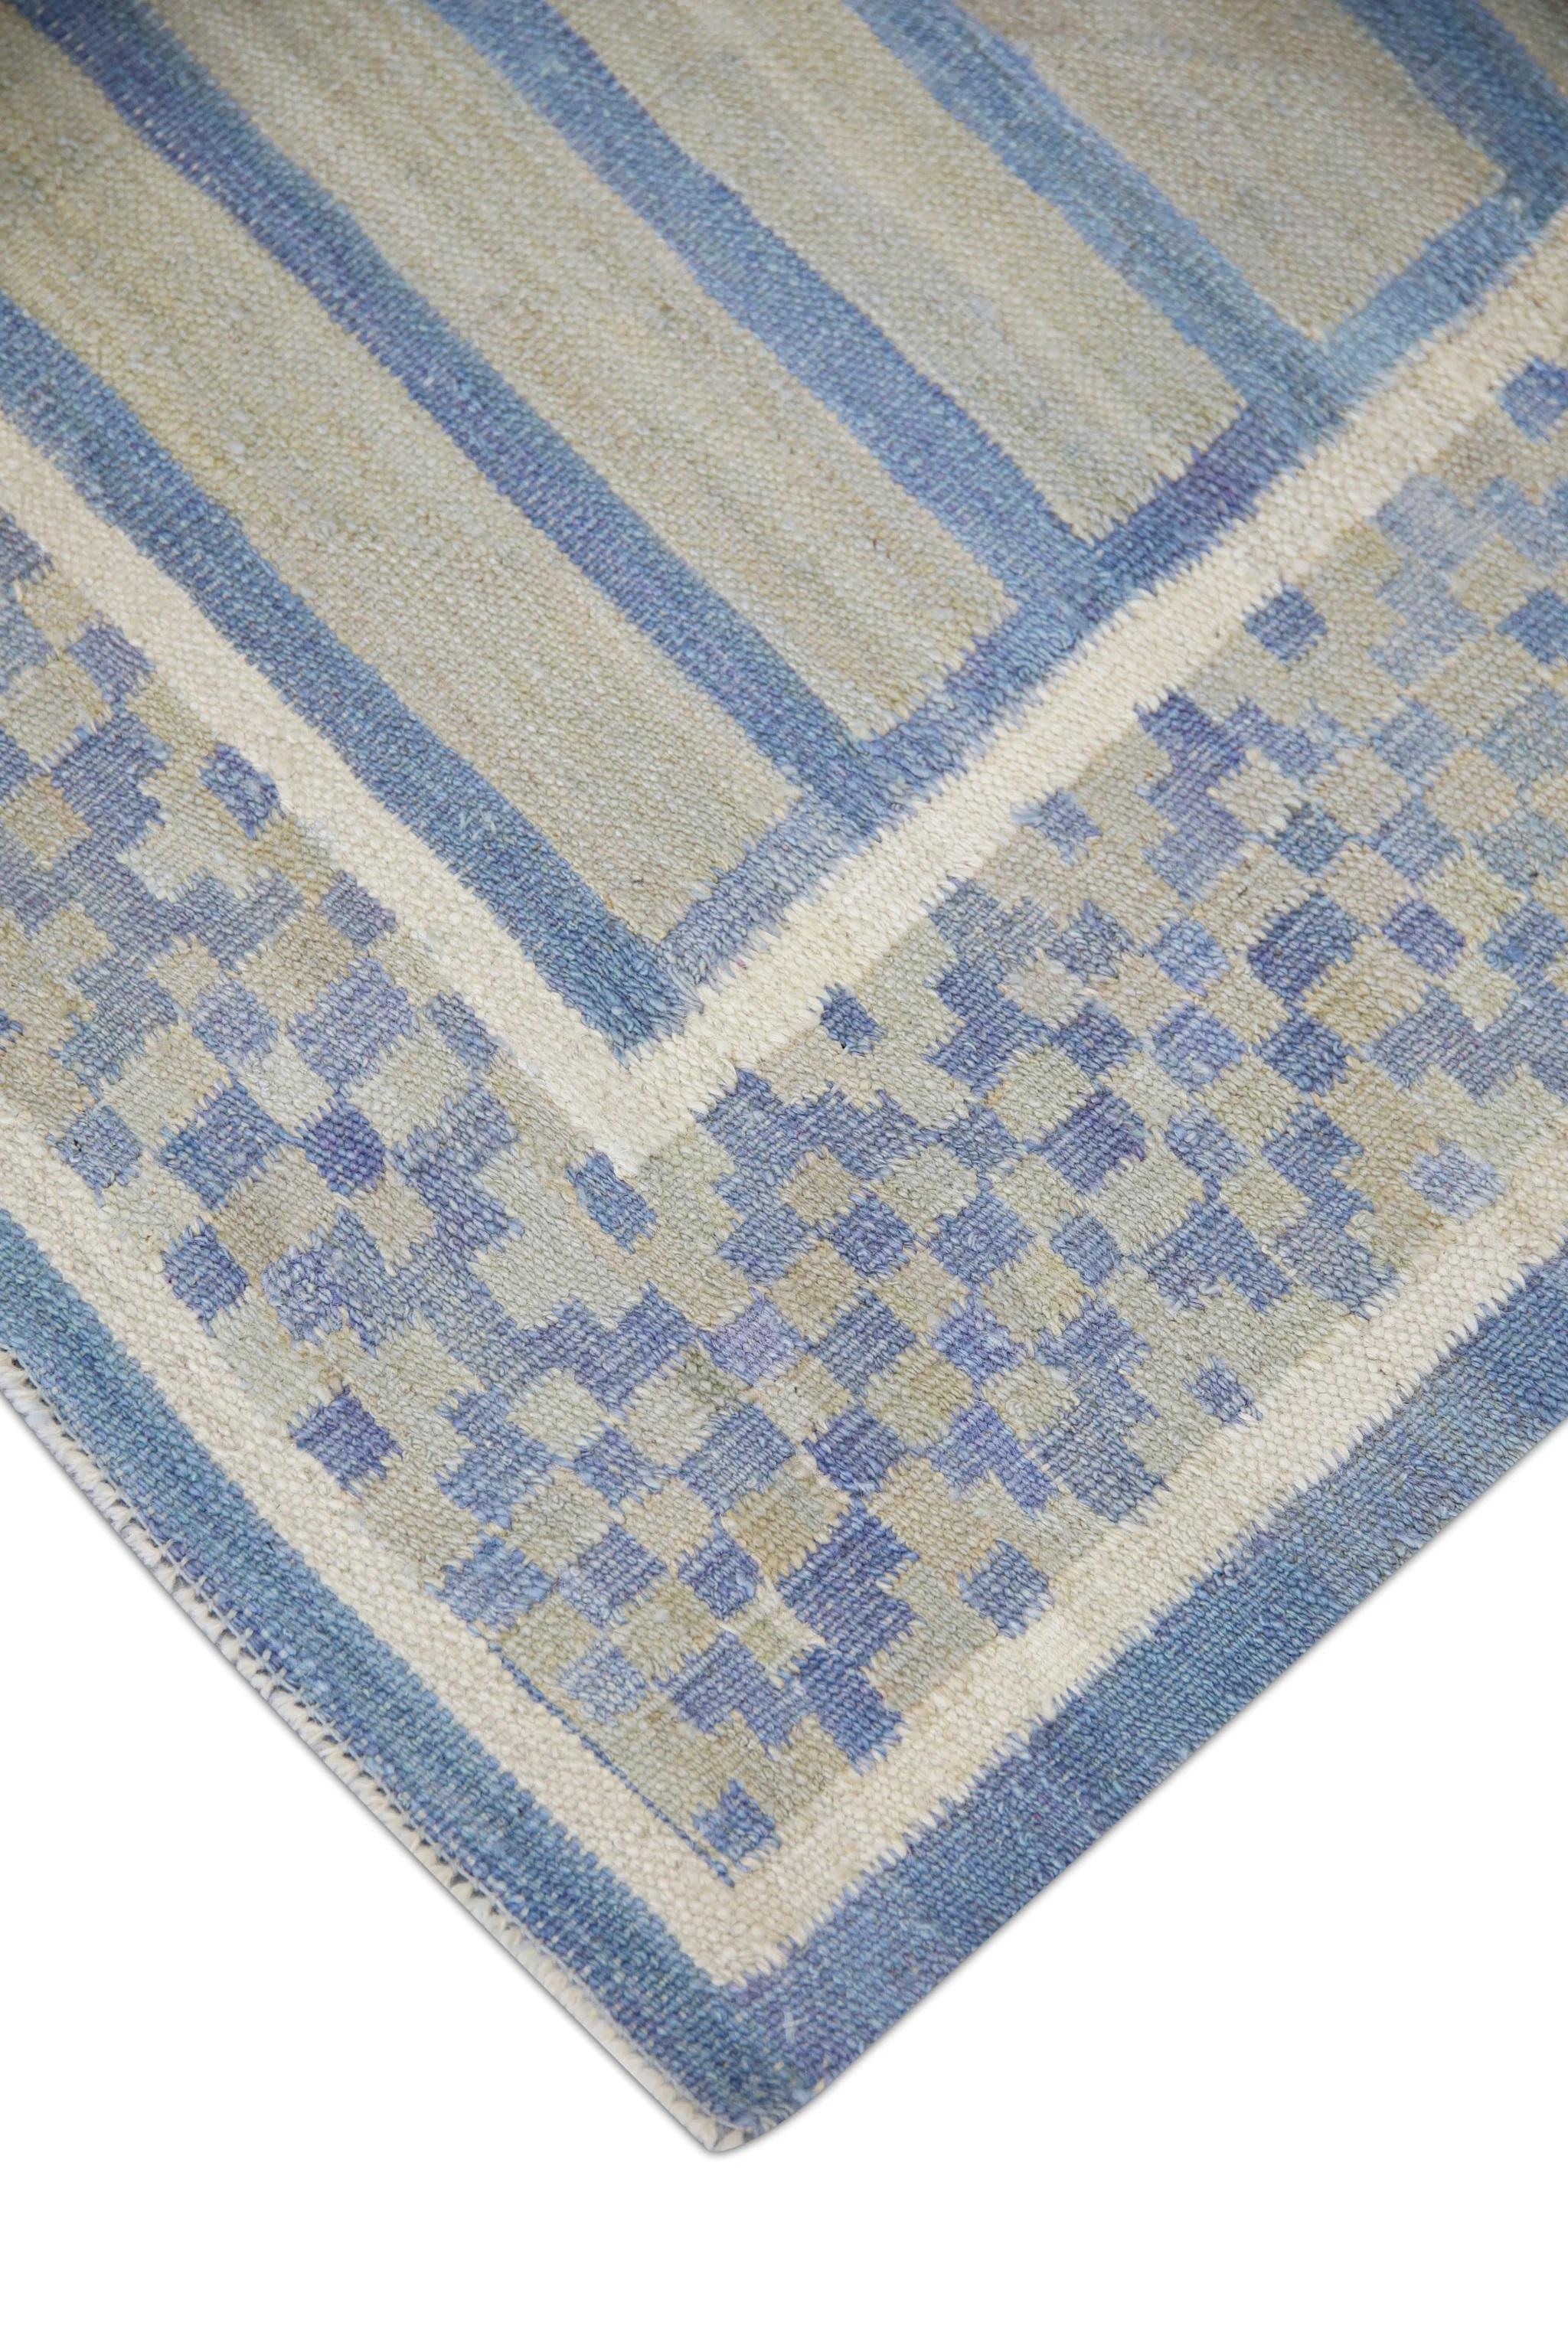 This exquisite Turkish flatweave Kilim rug is a stunning masterpiece of traditional craftsmanship. Each rug is meticulously handwoven by skilled artisans using age-old techniques that have been passed down through generations. The intricate design